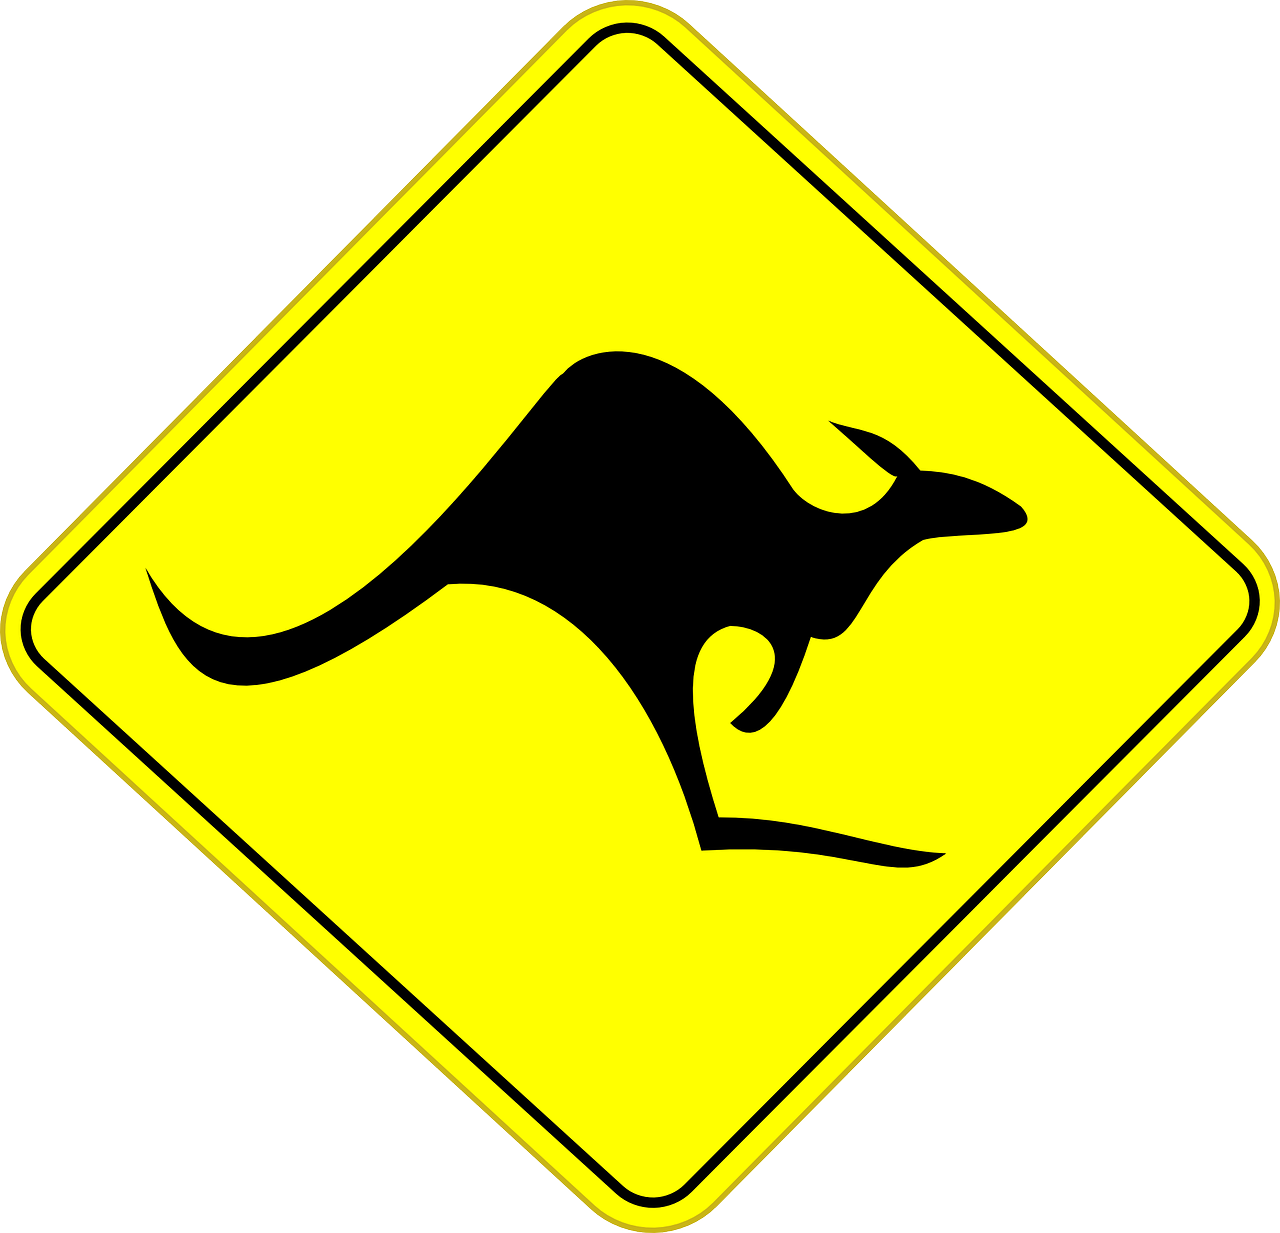 a yellow kangaroo crossing sign on a white background, shutterstock, hurufiyya, in the shape of a rat, artist unknown, gauze, cad